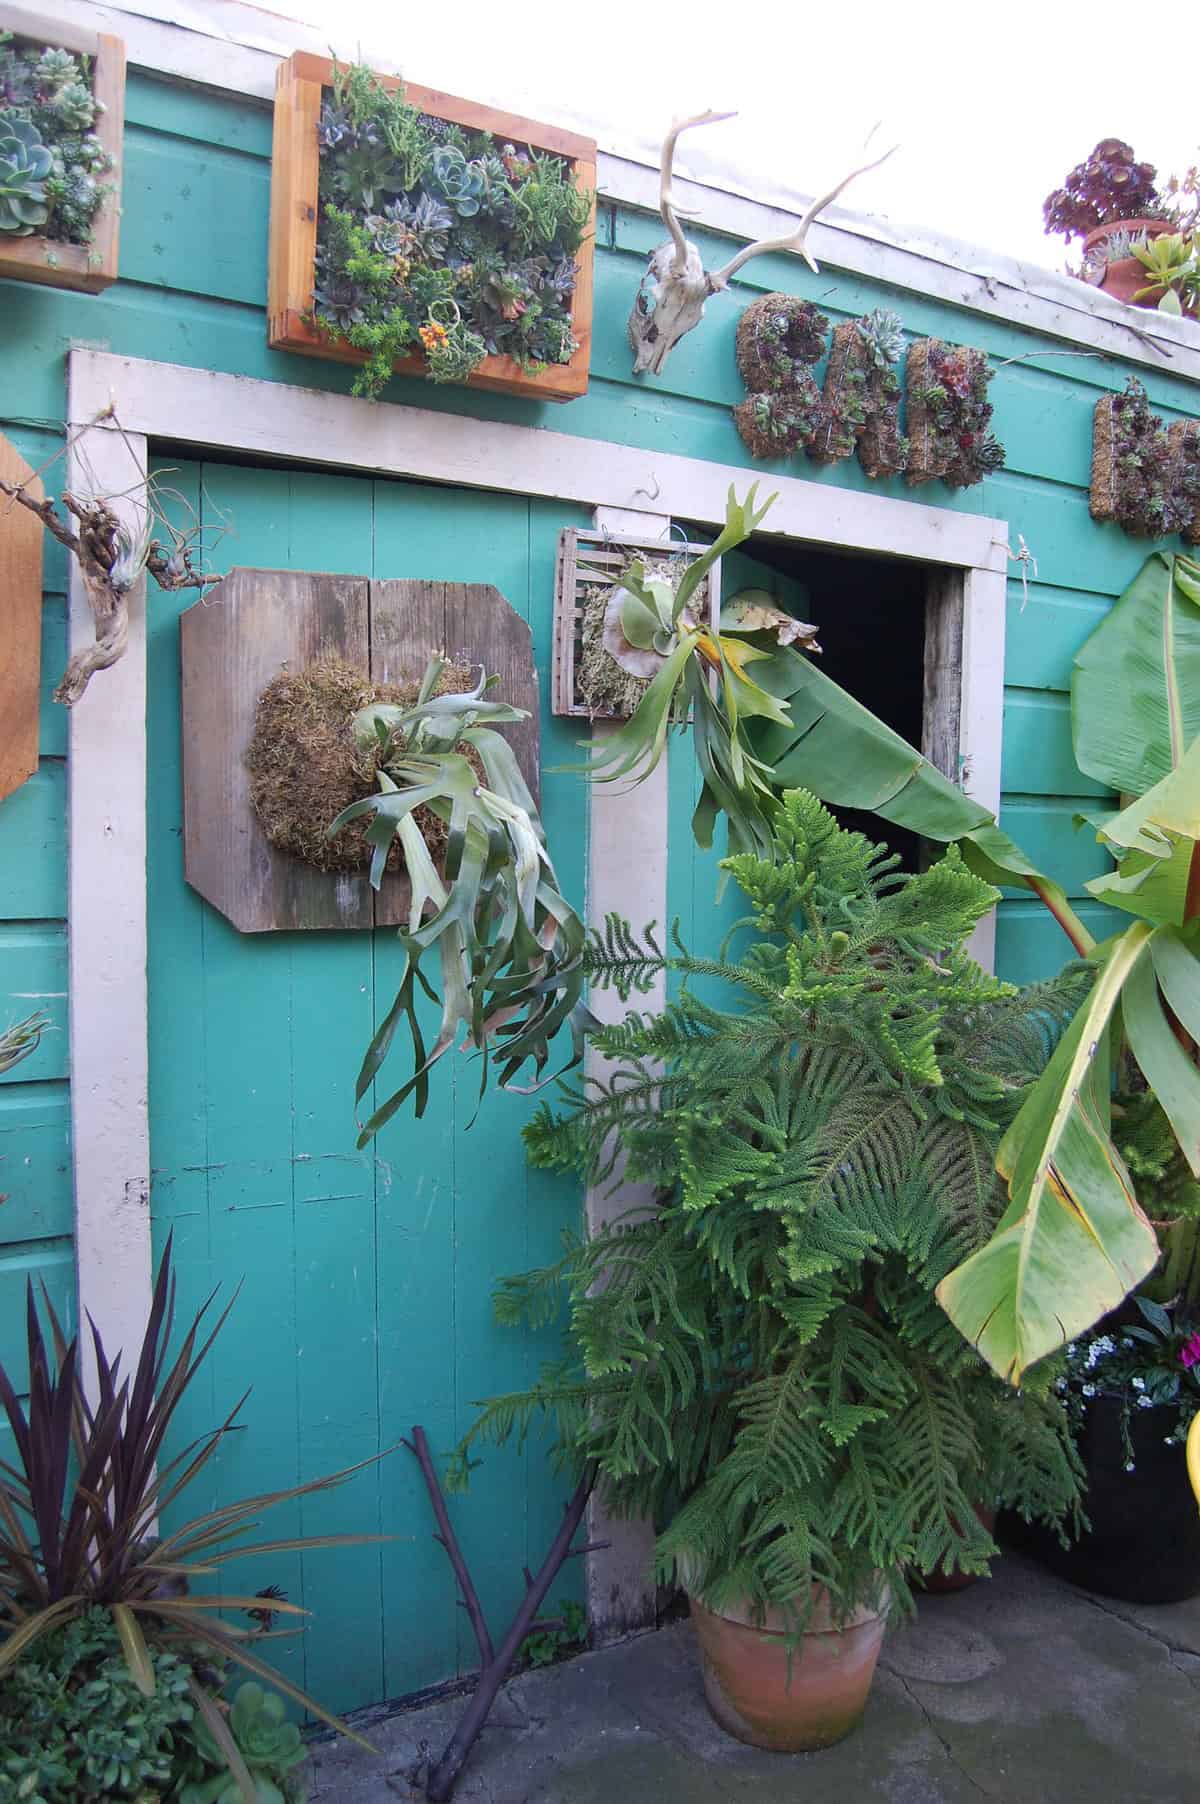 A vibrant teal garden shed adorned with various wall-mounted succulents and plants. The shed features a rustic wooden door partially open, revealing darkness inside, surrounded by lush green foliage.